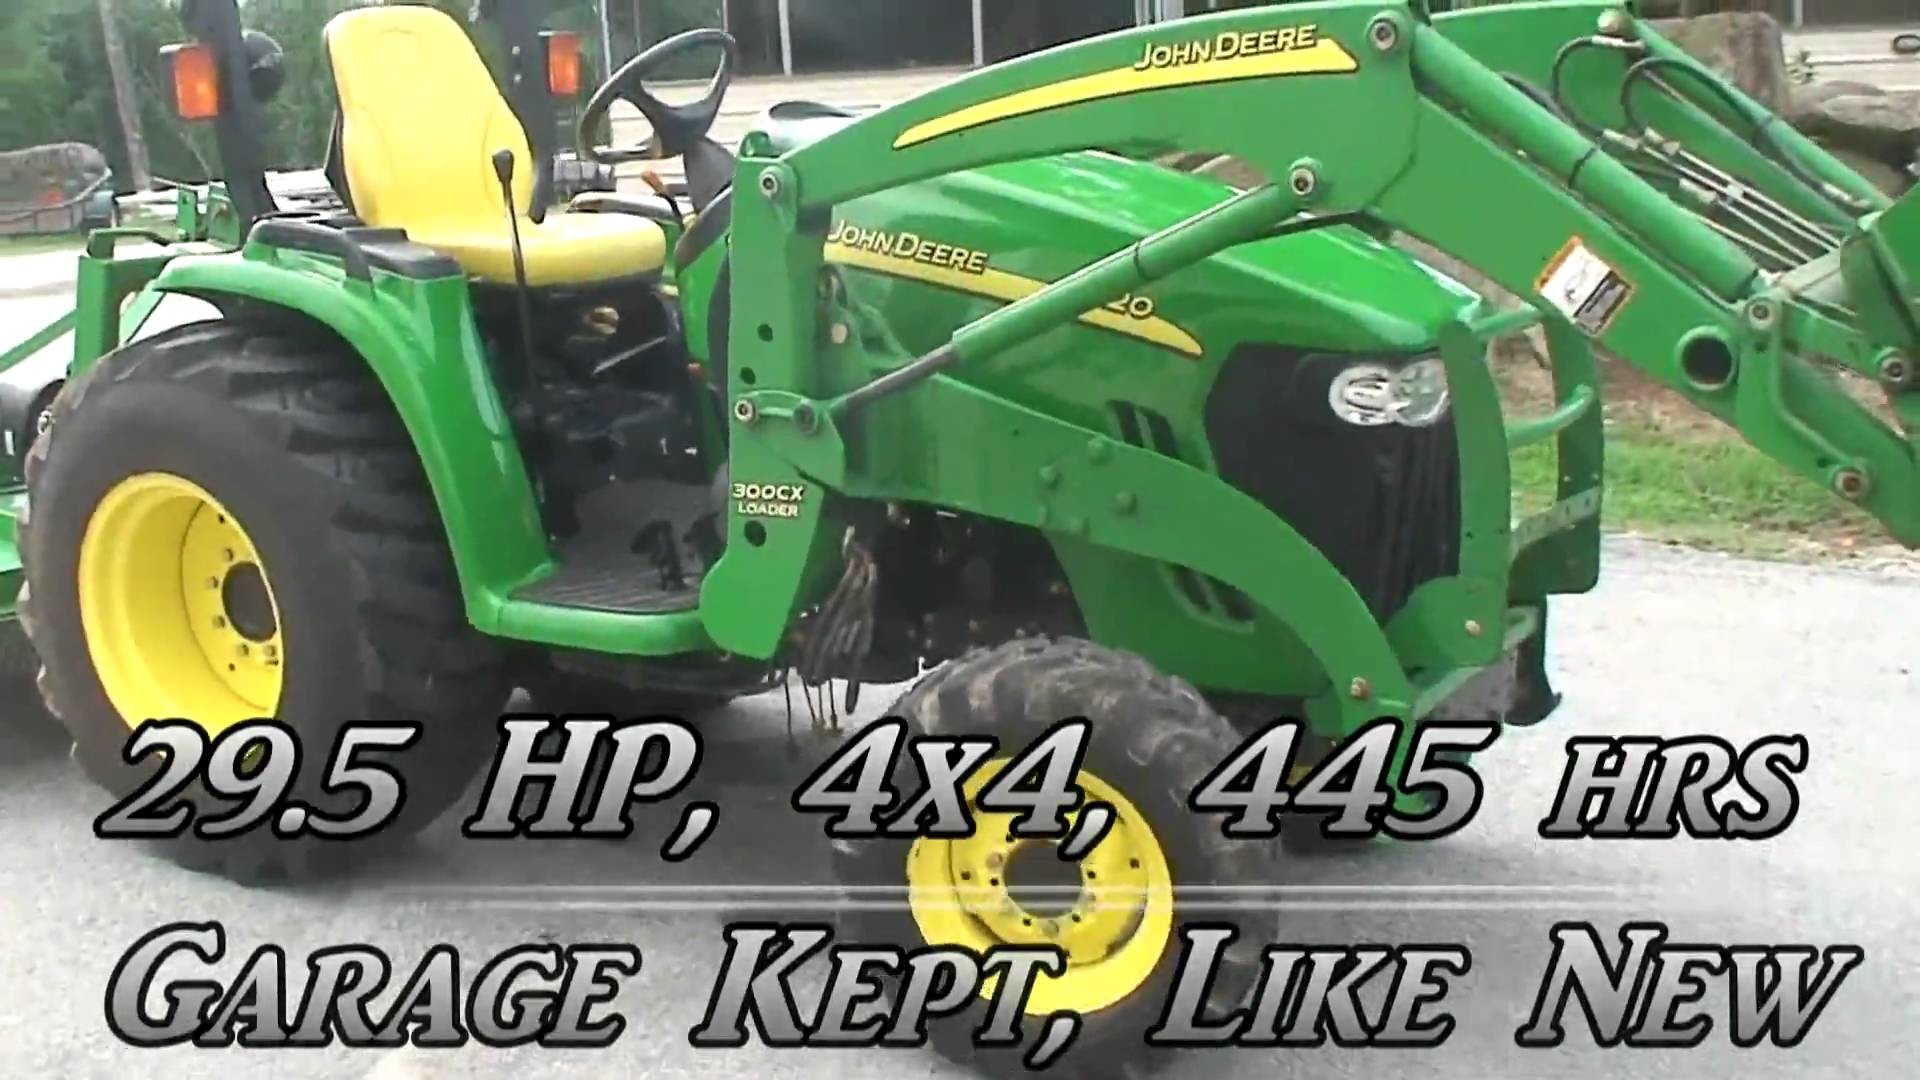 1920x1080 John Deere 3120 utility tractor with 4wd, hydro transmission, and 300cx  loader - YouTube